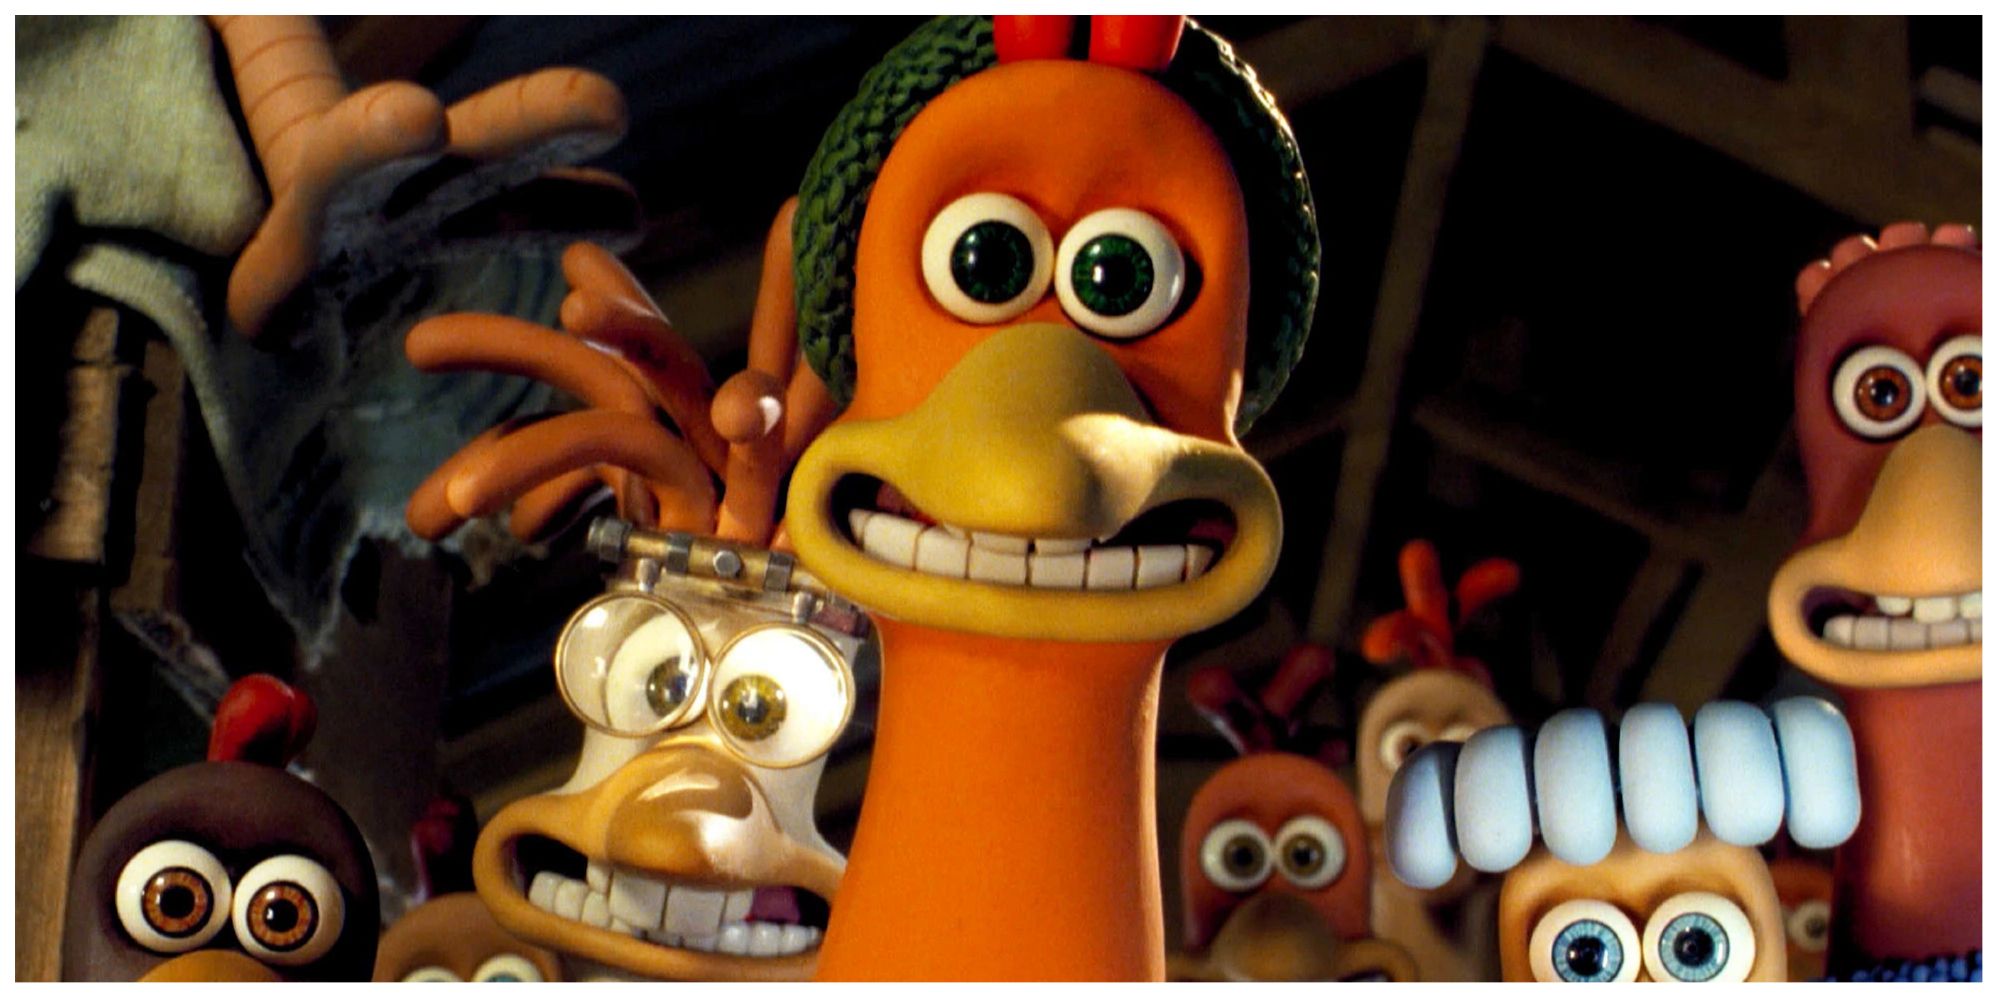 An image from Chicken Run, which was co-produced by Aardman Animations and DreamWorks.